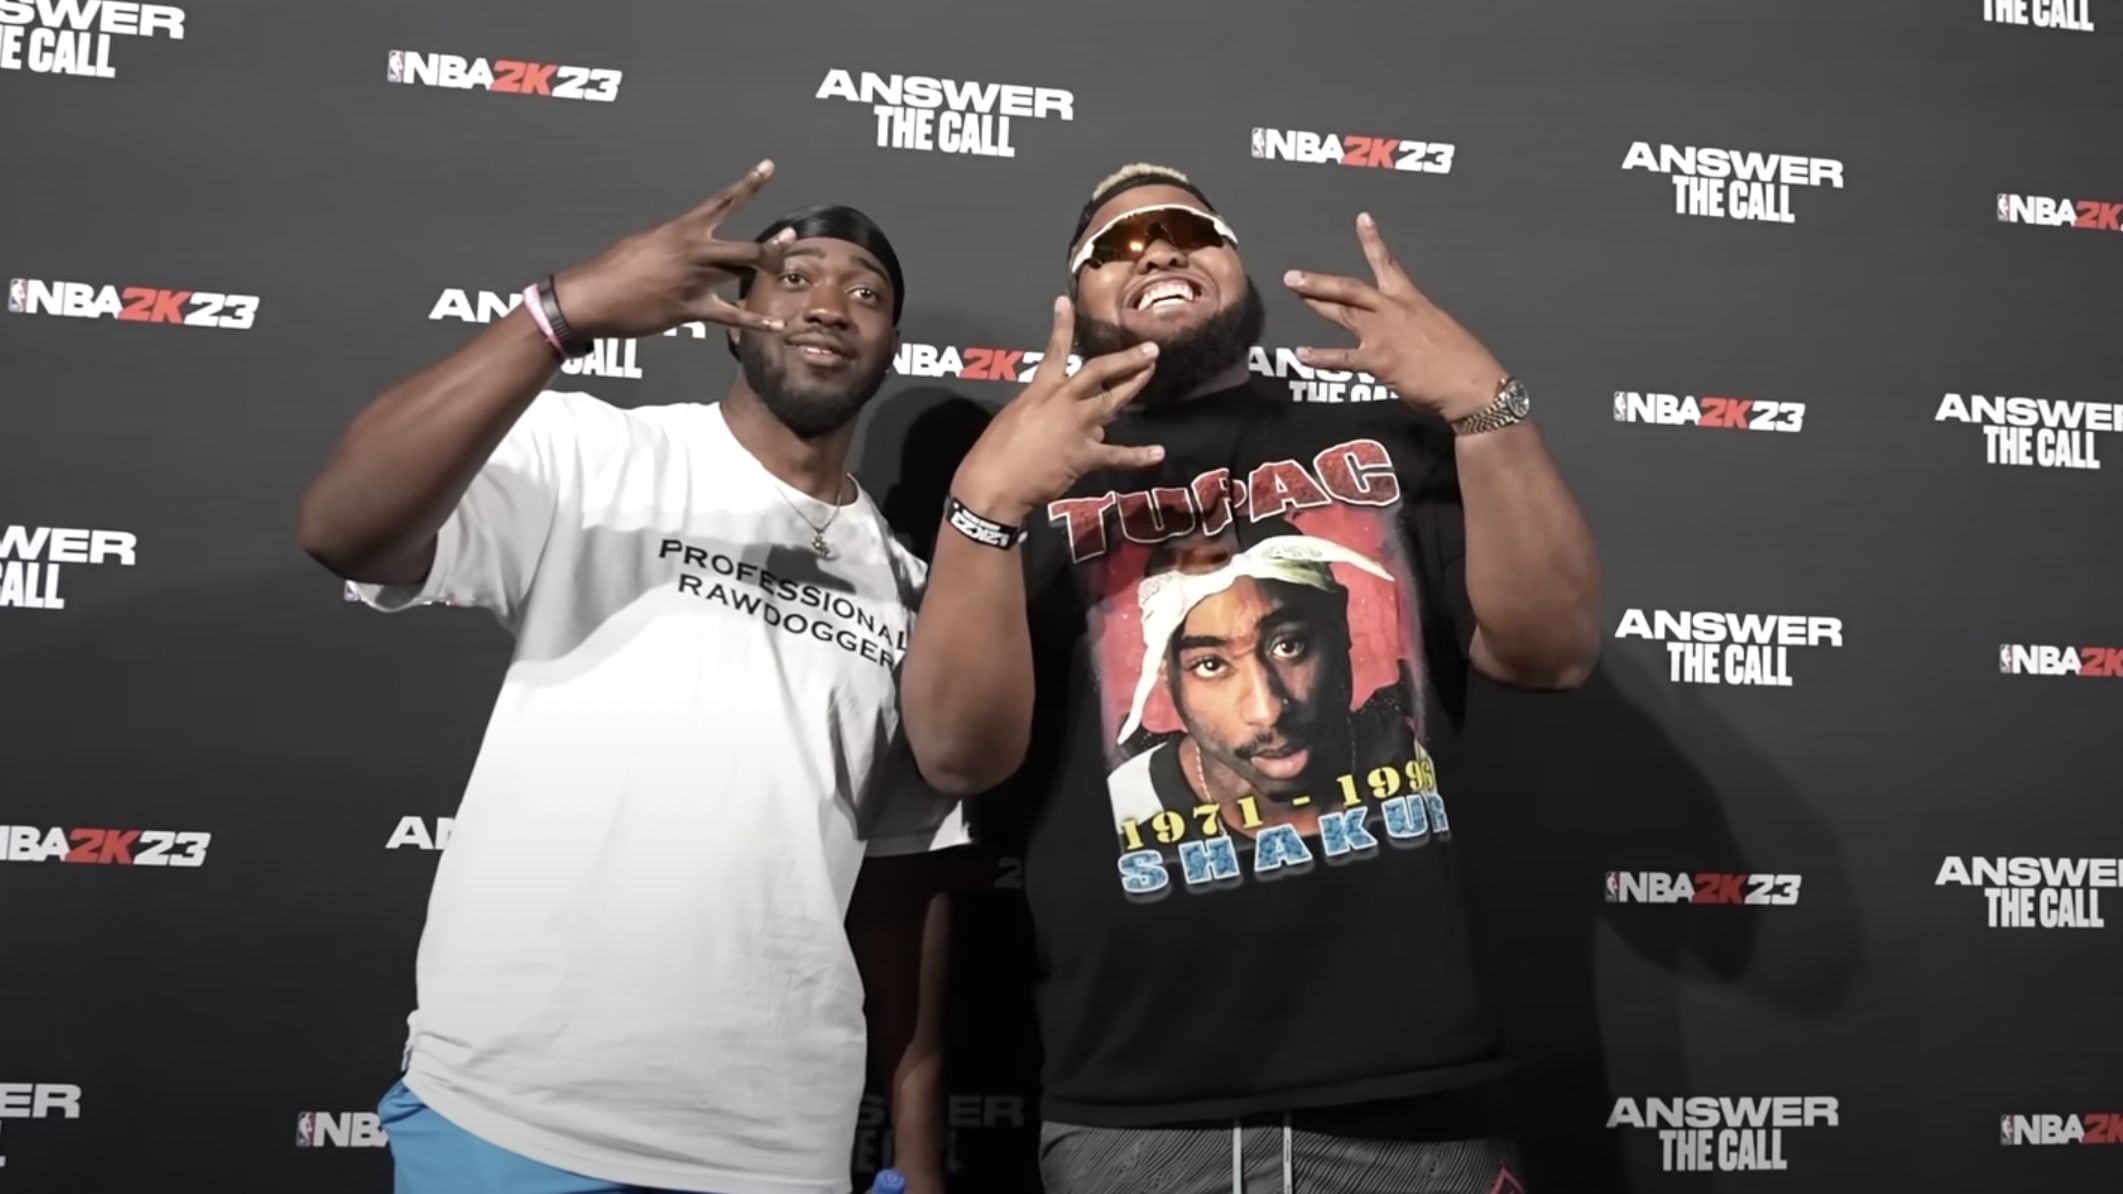 JiDion and Druski at the NBA 2K23 event in Las Vegas